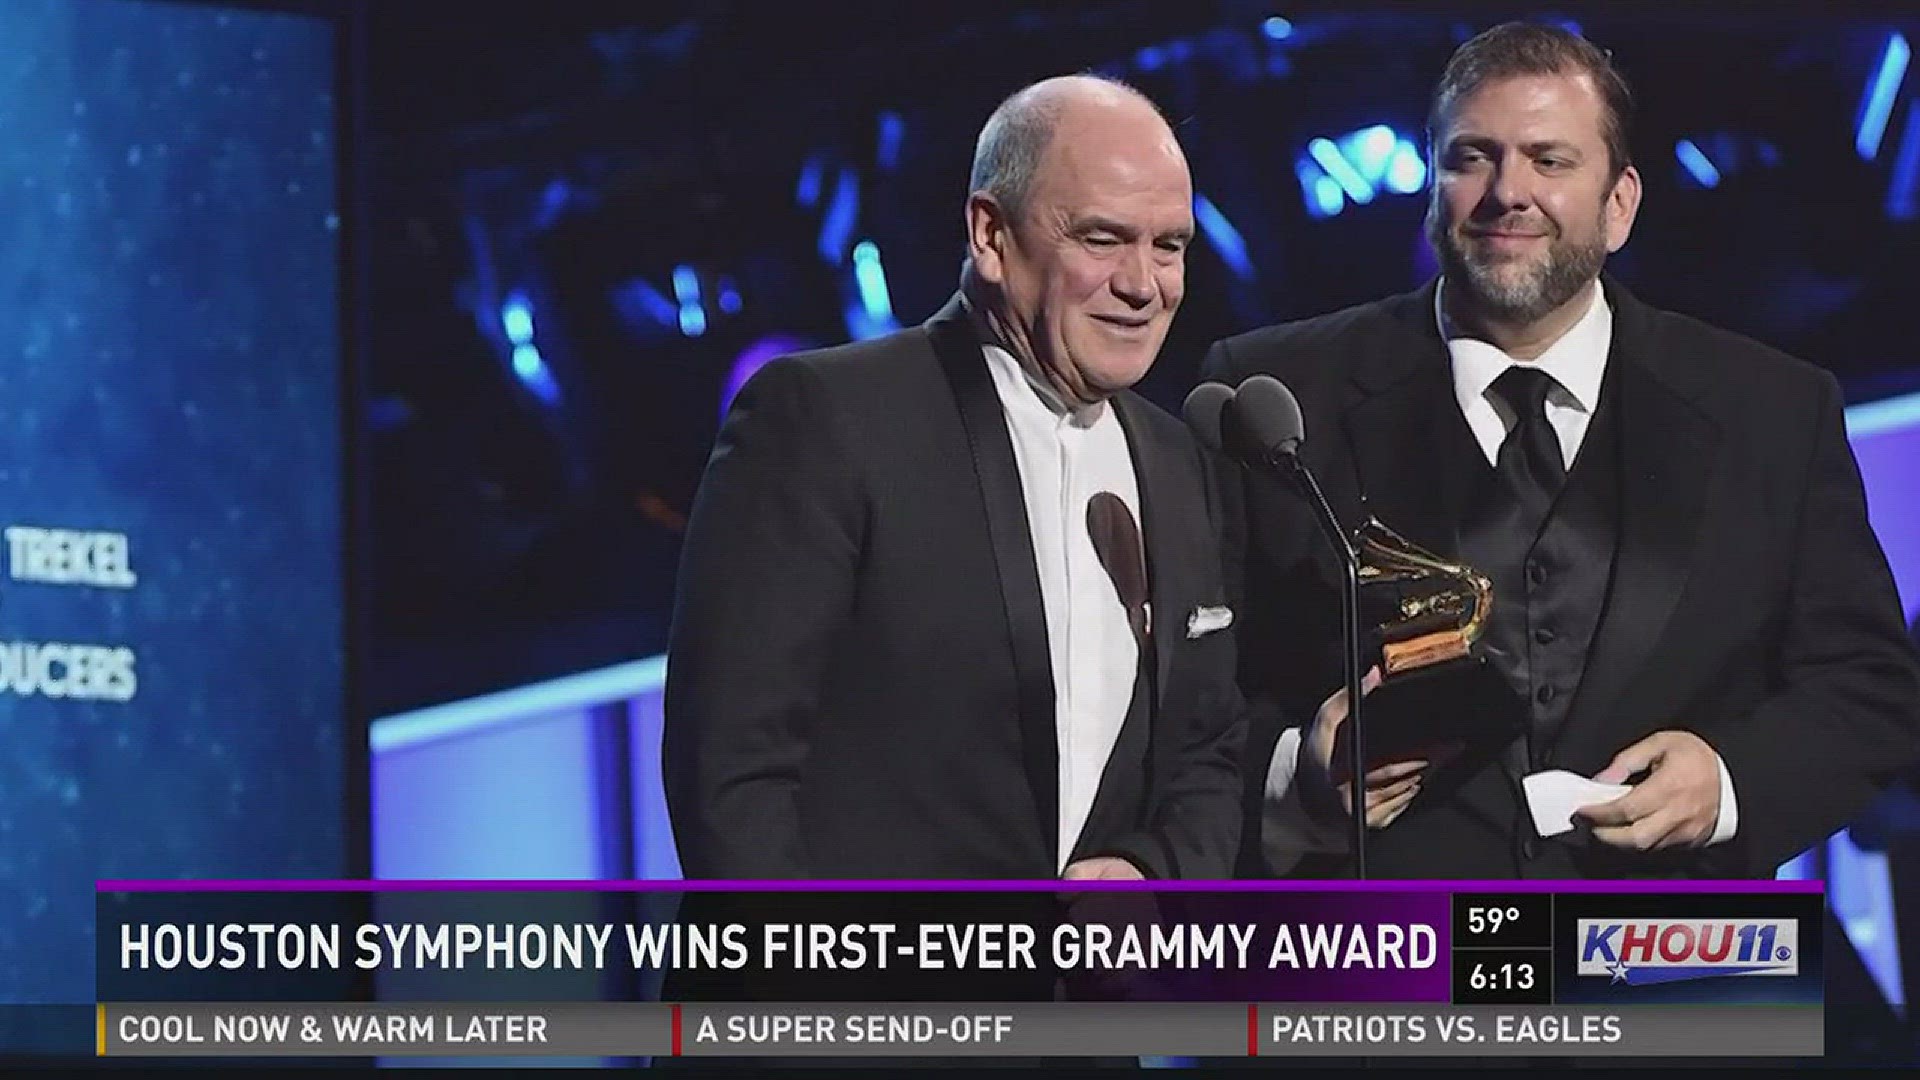 The 2018 Grammy Awards turned out to be a big night for Houston, not just for the Houston Symphony, but for musicians all over the city.